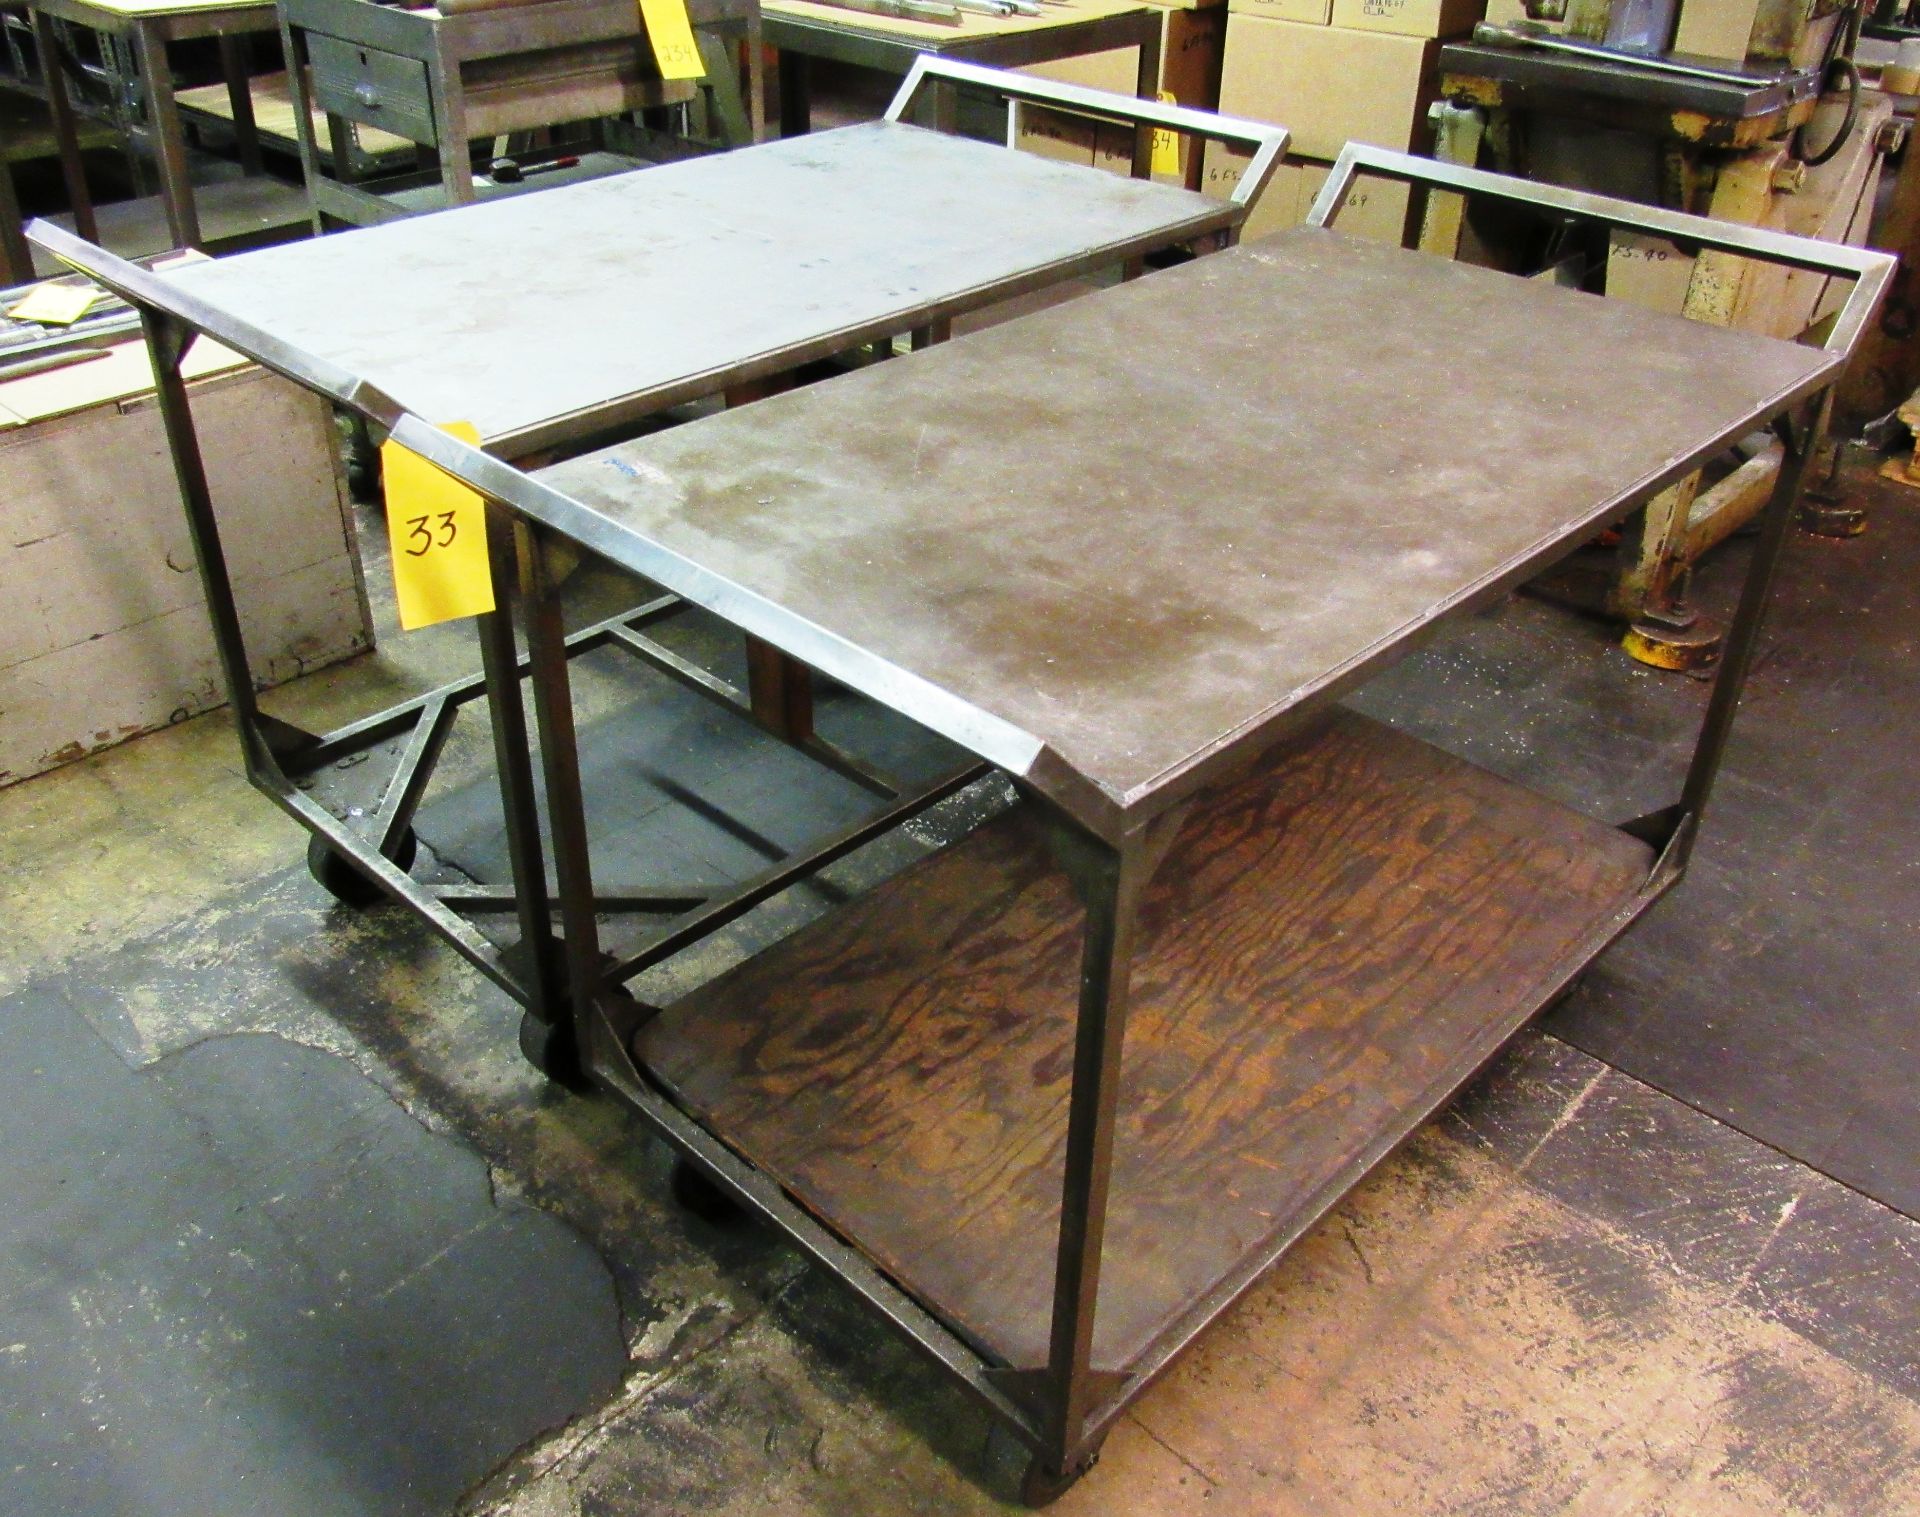 (4) 24" x 42" x 30"H Portable Steel Tables